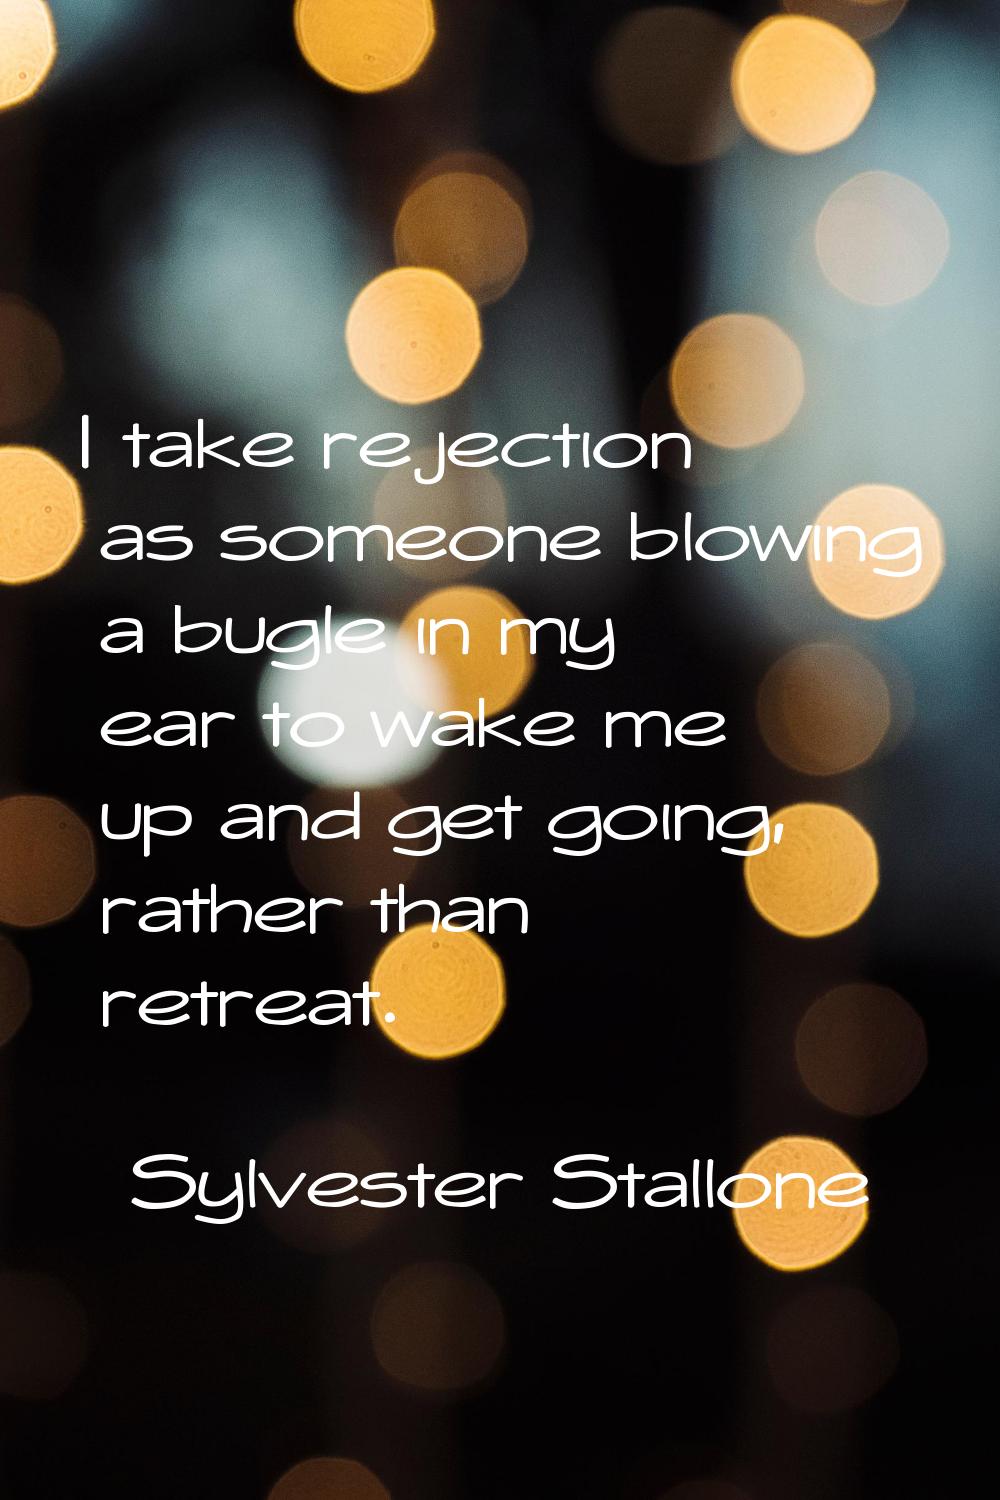 I take rejection as someone blowing a bugle in my ear to wake me up and get going, rather than retr